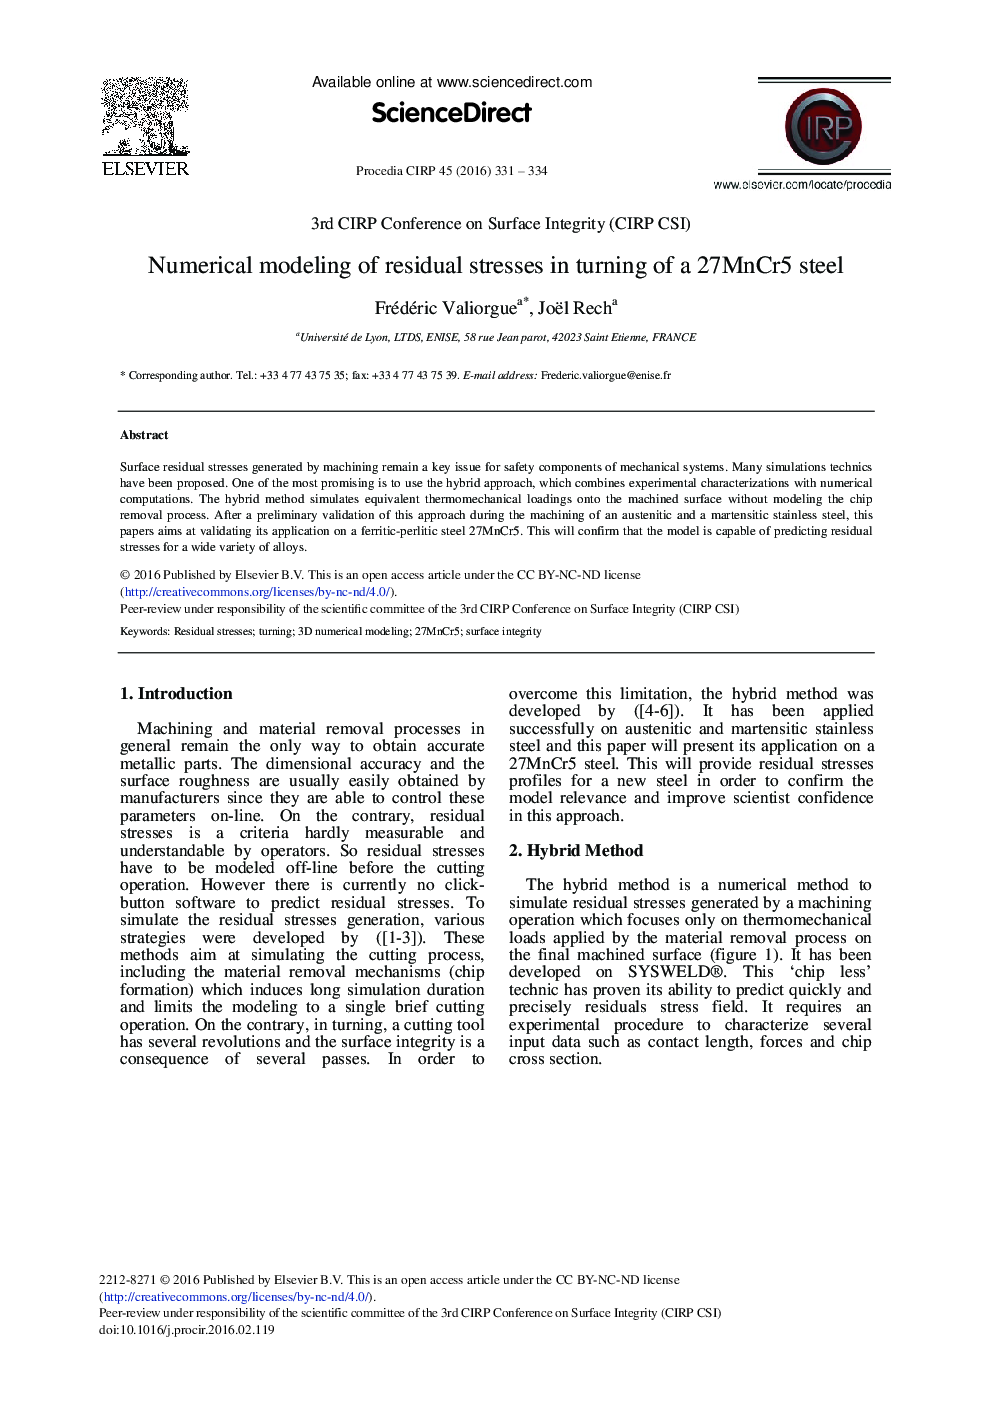 Numerical Modeling of Residual Stresses in Turning of a 27MnCr5 Steel 